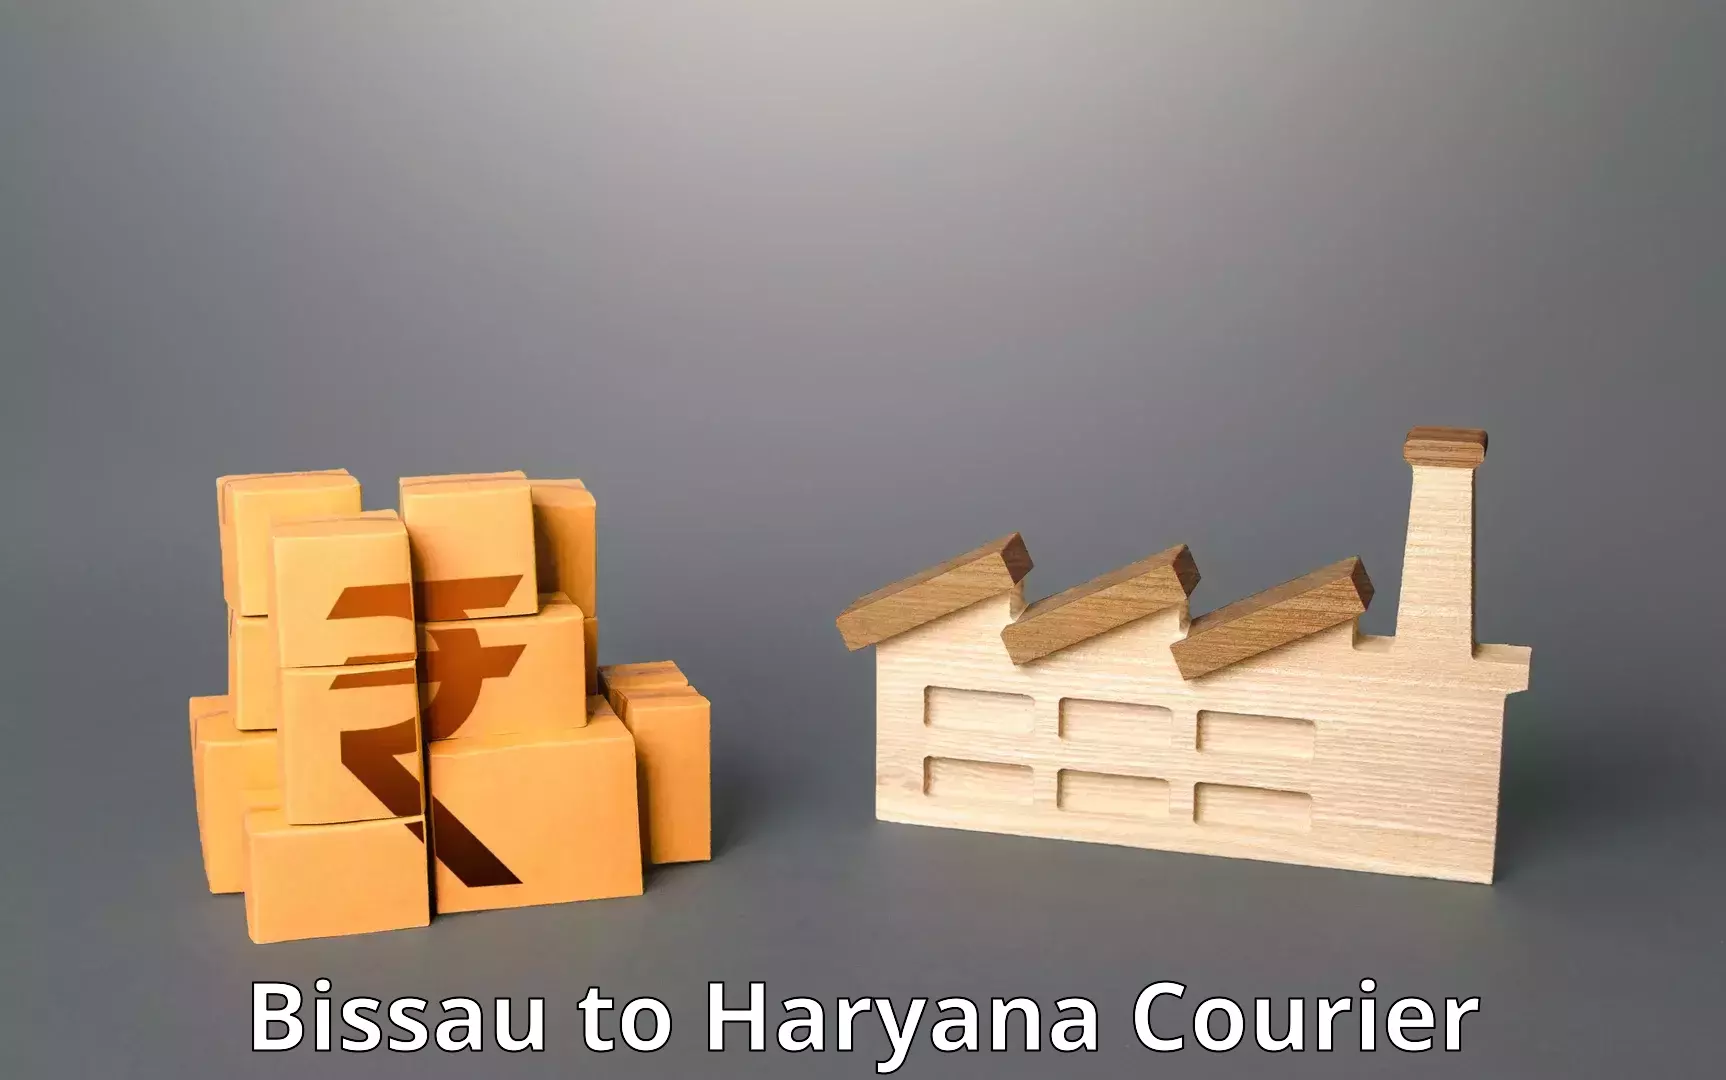 State-of-the-art courier technology Bissau to Bilaspur Haryana